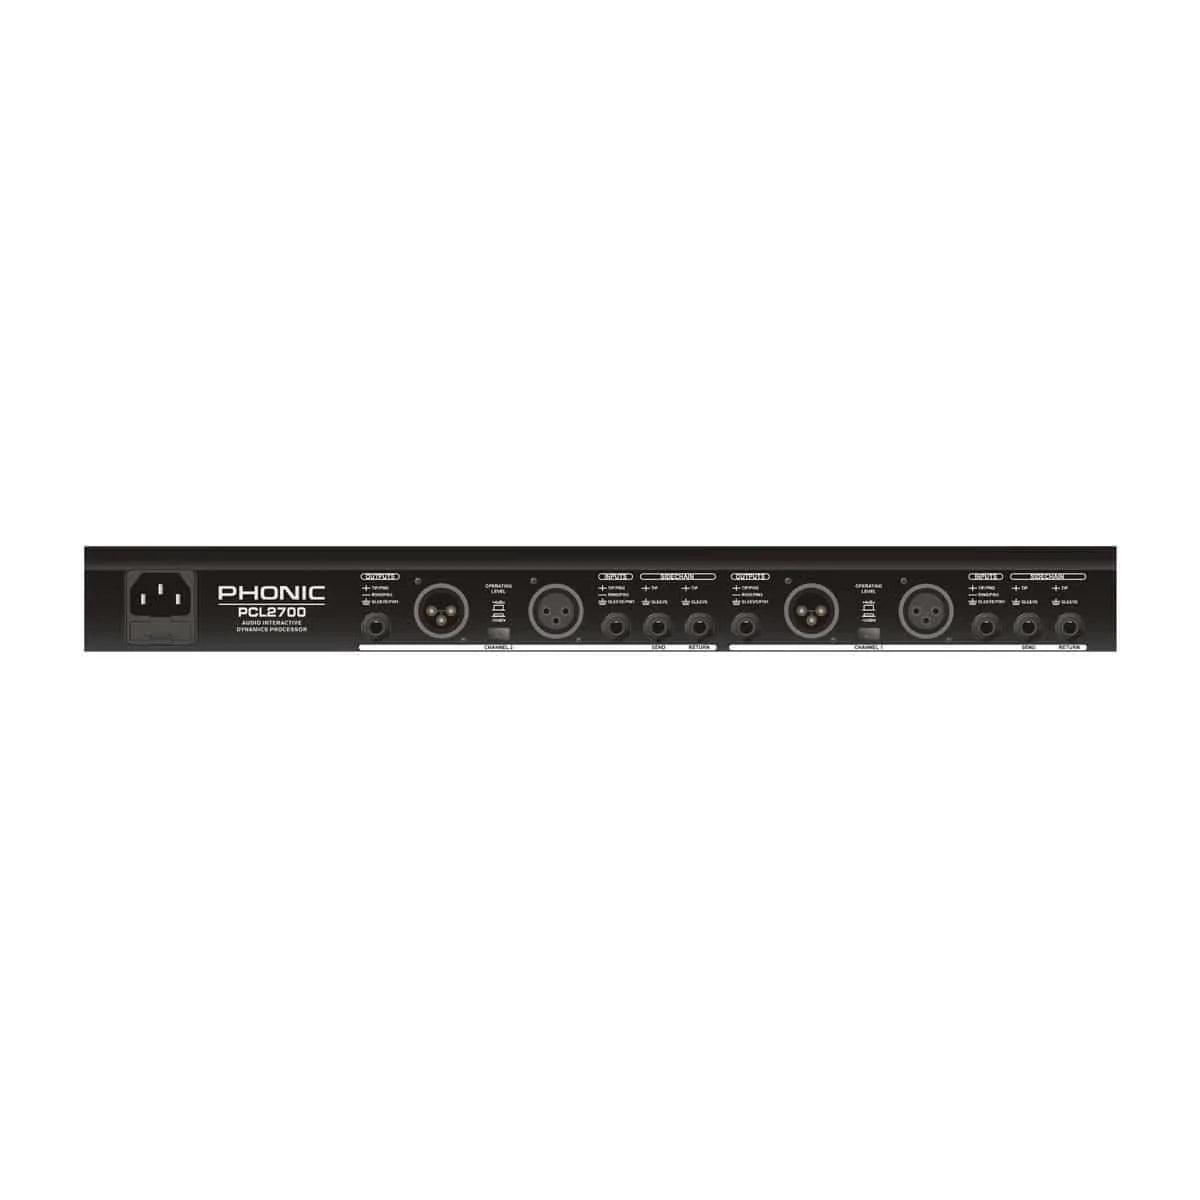 Phonic PCL2700 2-channel Dynamic Processor with Expander, Gate, Compressor, Limiter